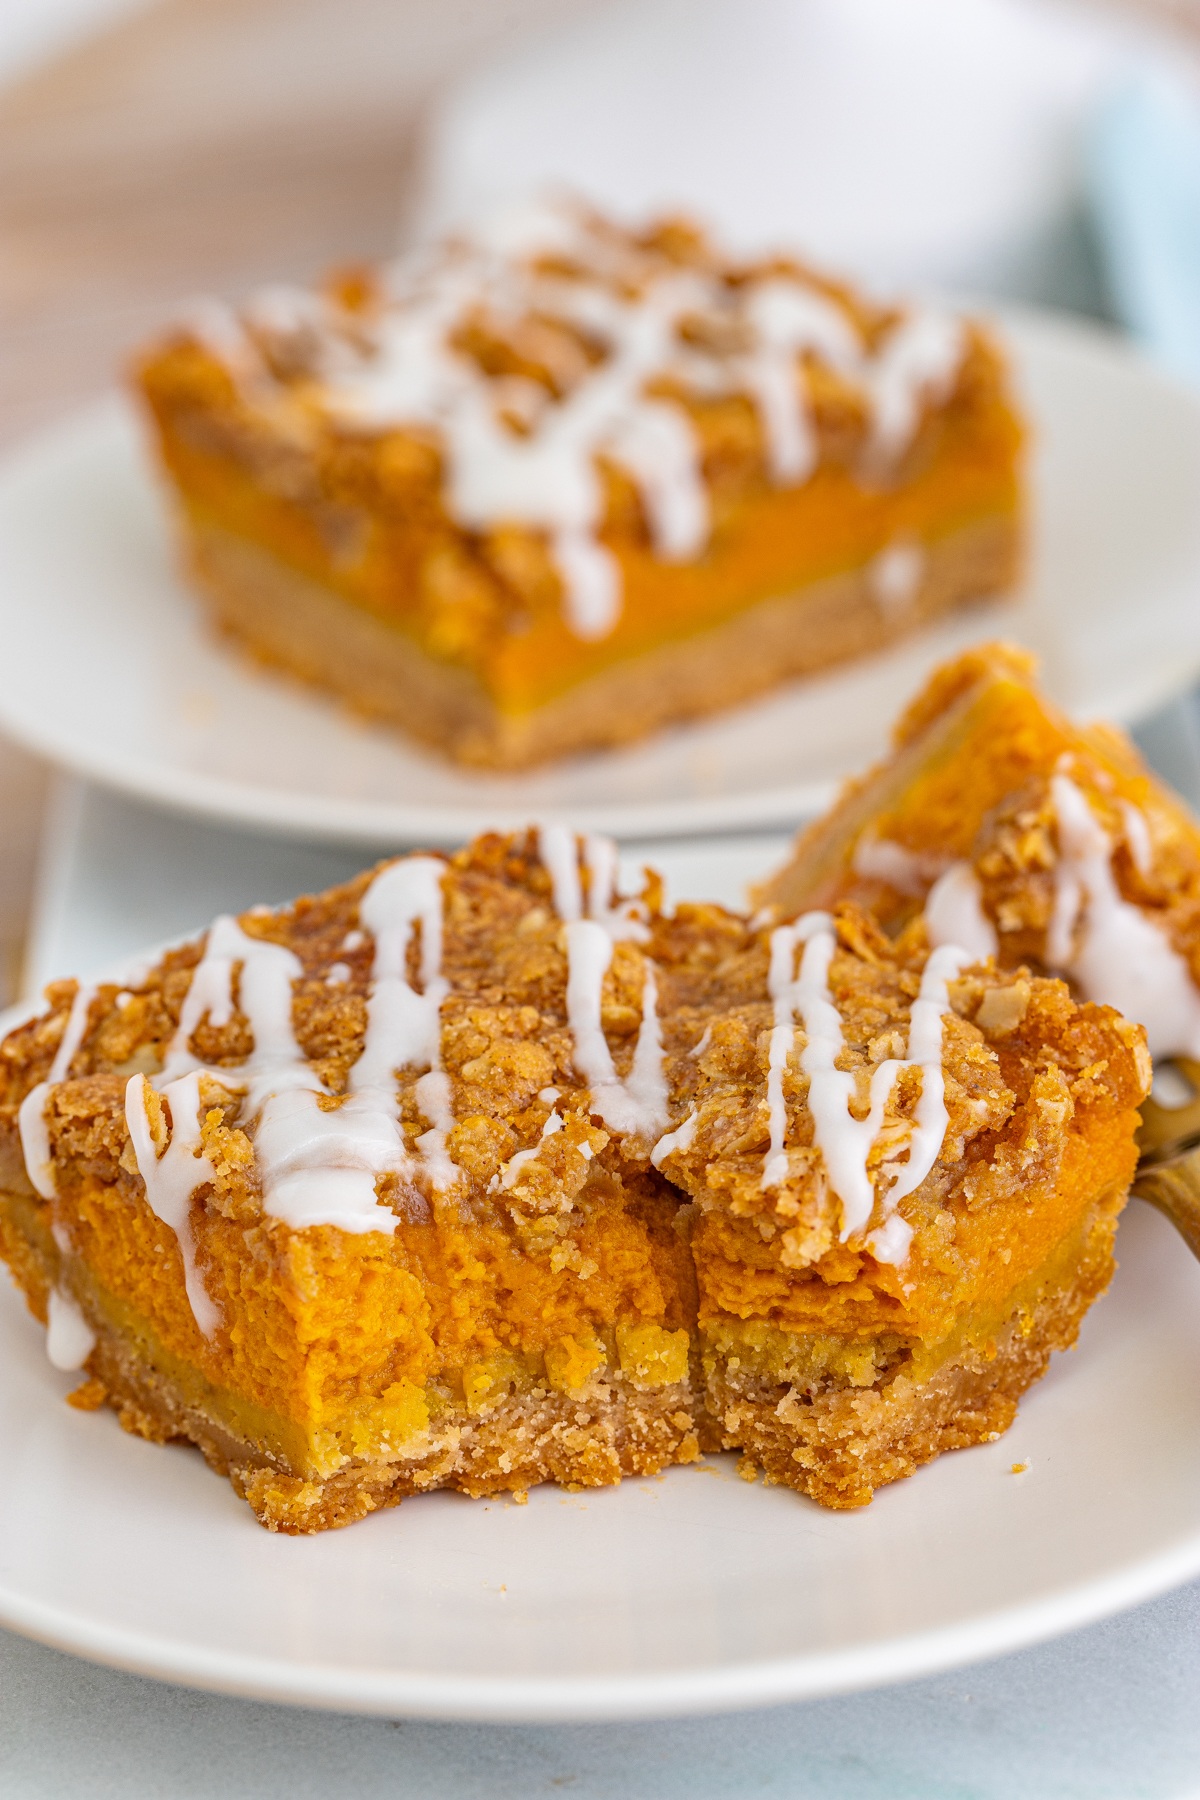 pumpkin bar with streusel topping with a bite out of it